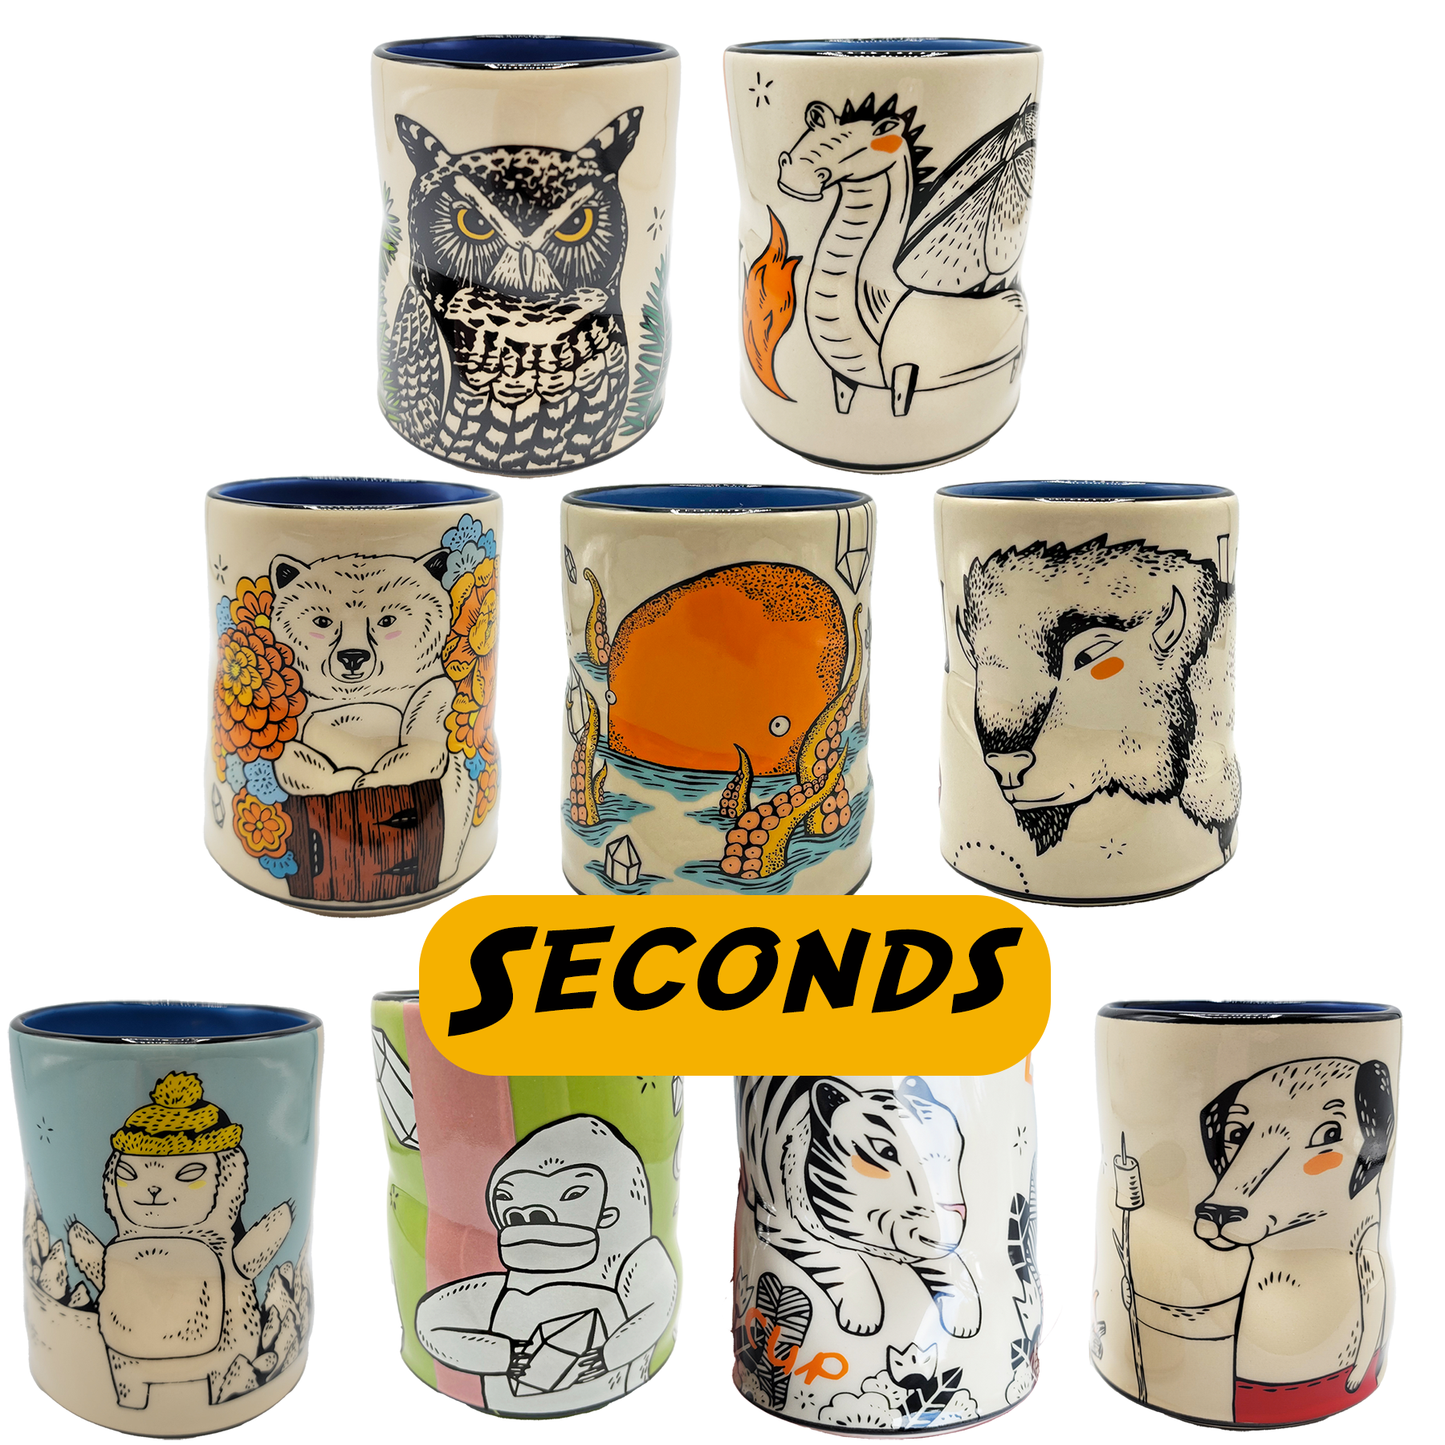 Seconds - X-Large Lucky Cup